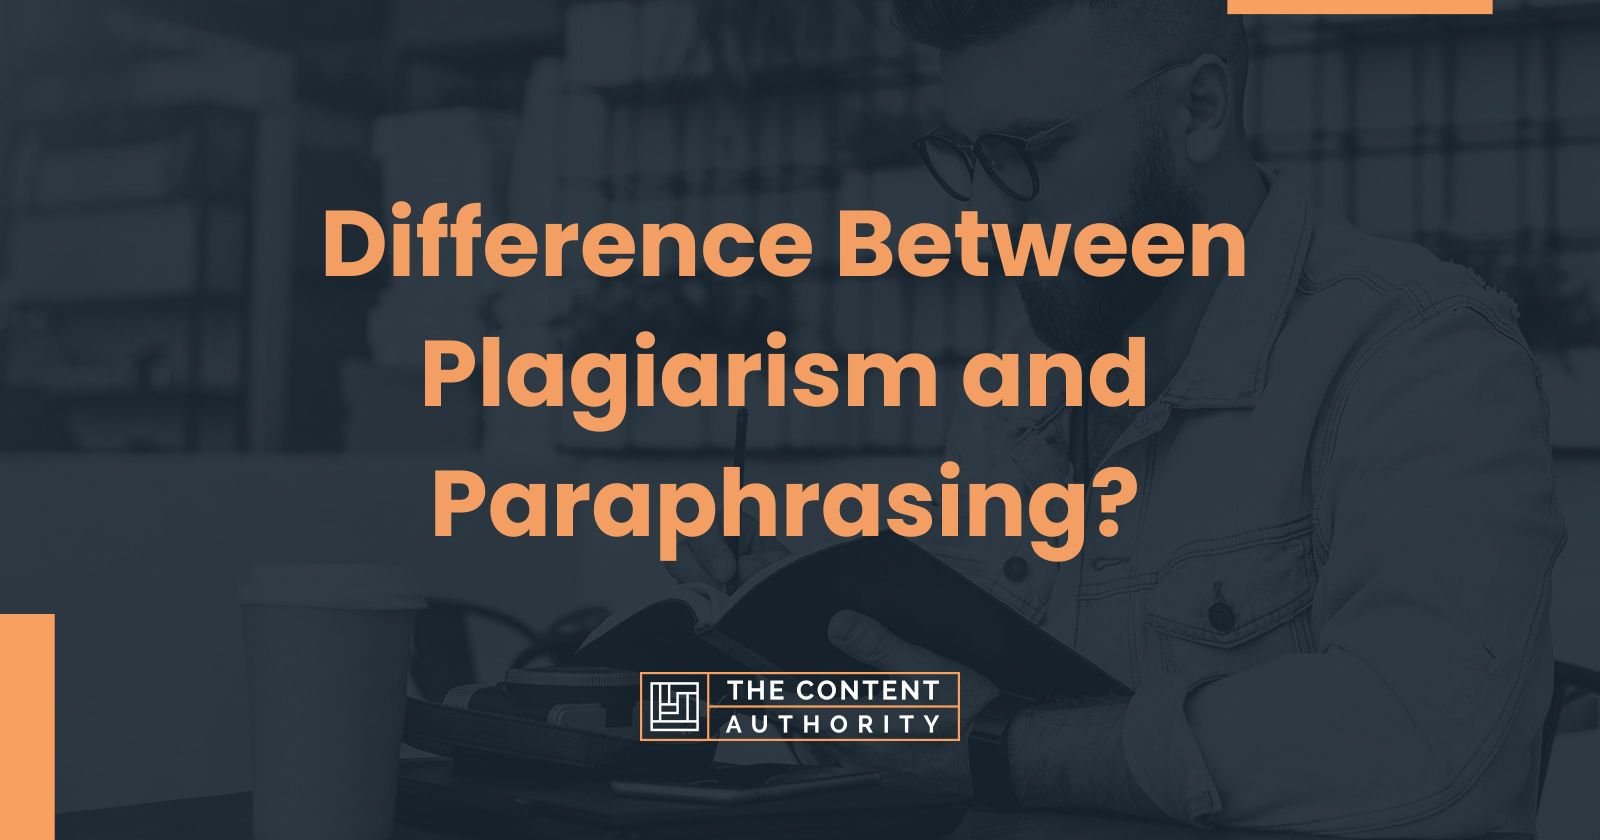 paraphrasing and plagiarism difference